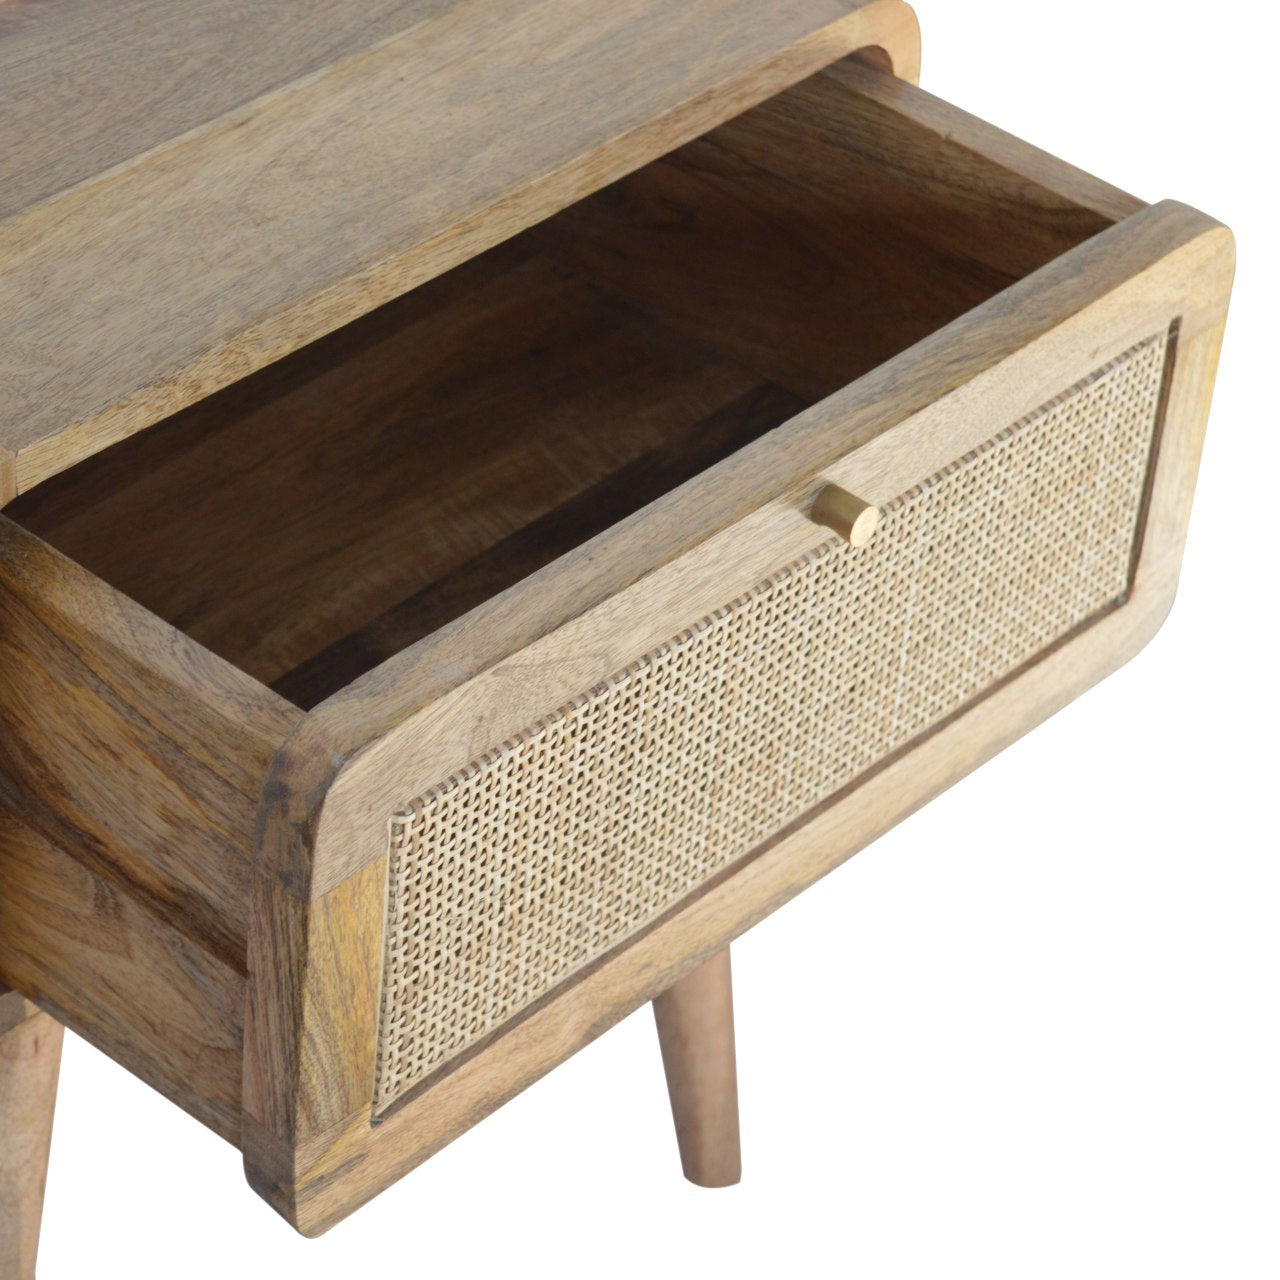 Woven Rattan Effect Storage Table - mancavesuperstore